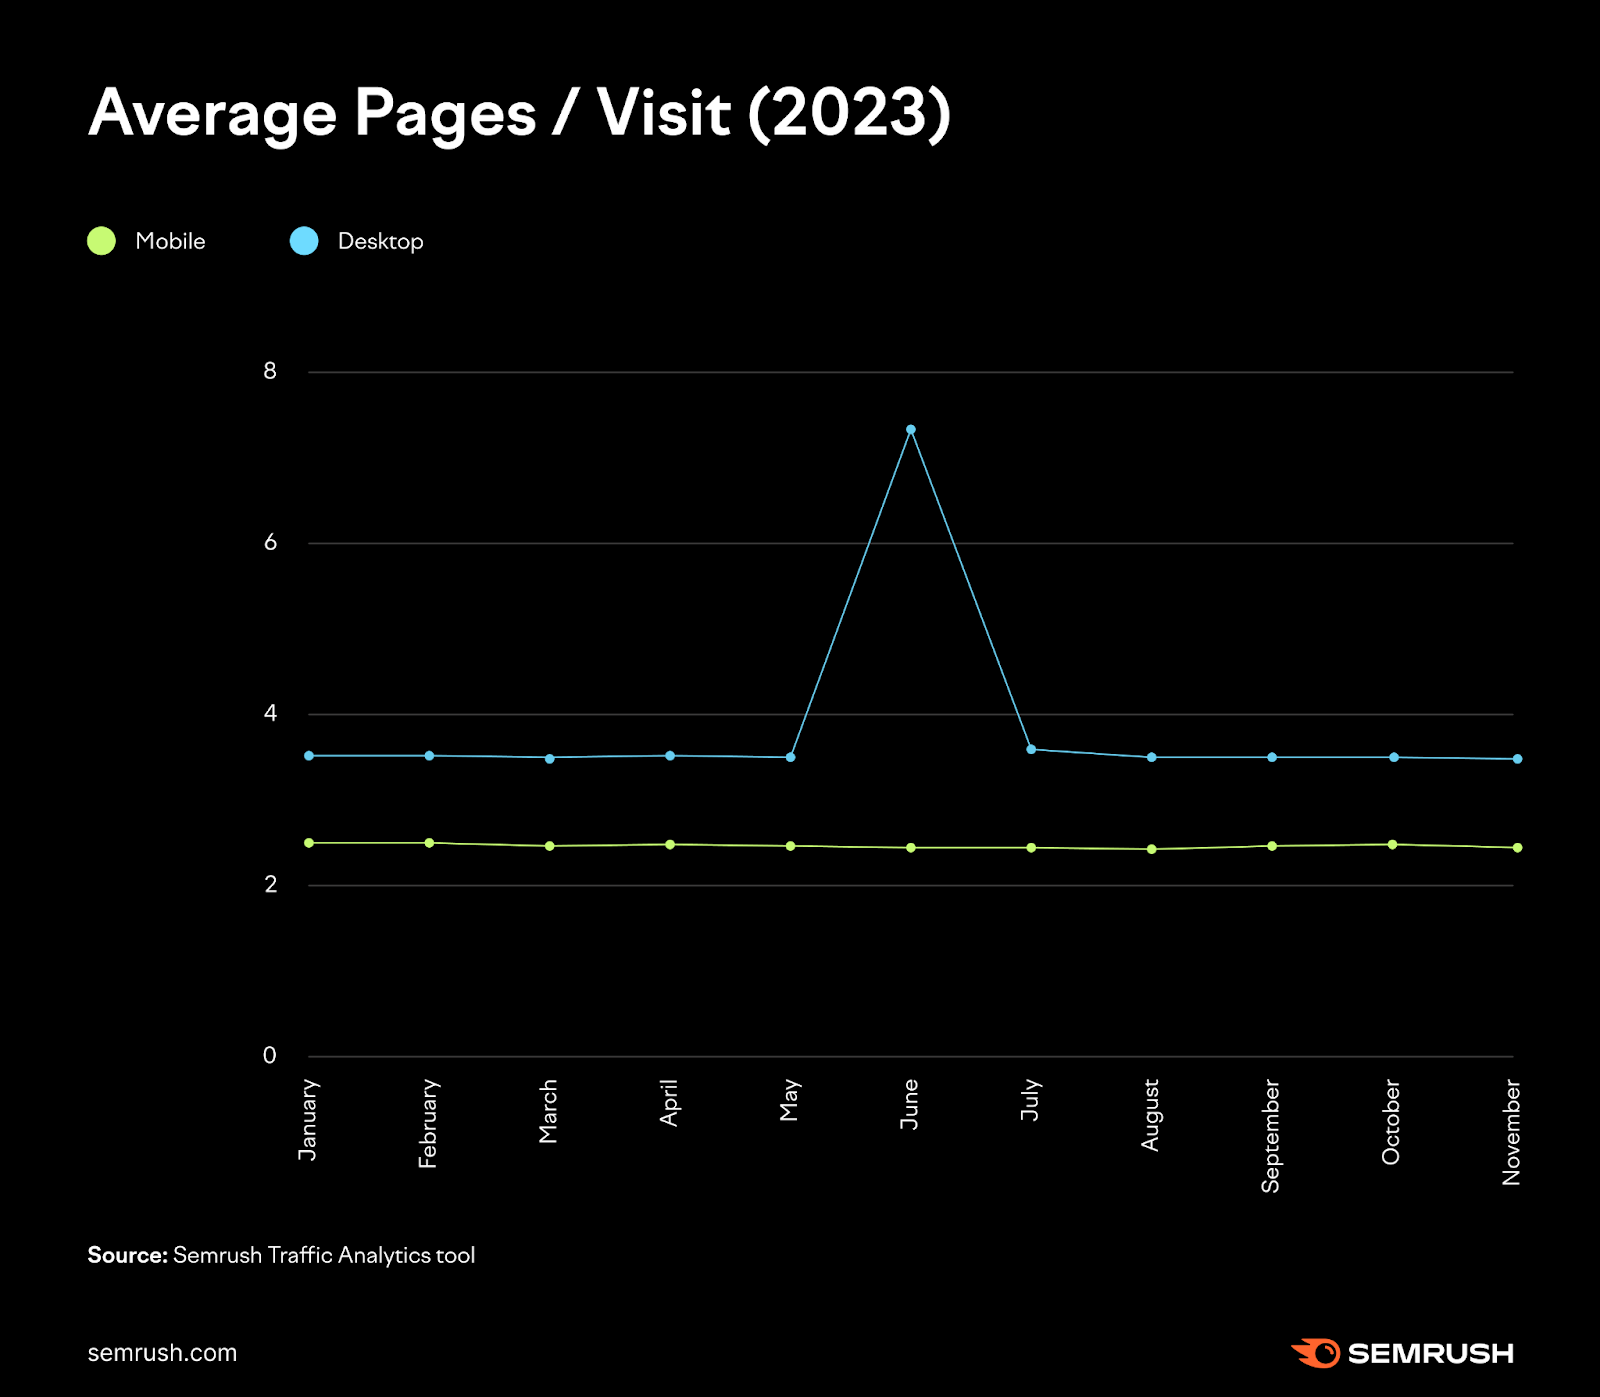 A graph showing average pages per visit in 2023, for desktop and mobile, using data from Traffic Analytics tool